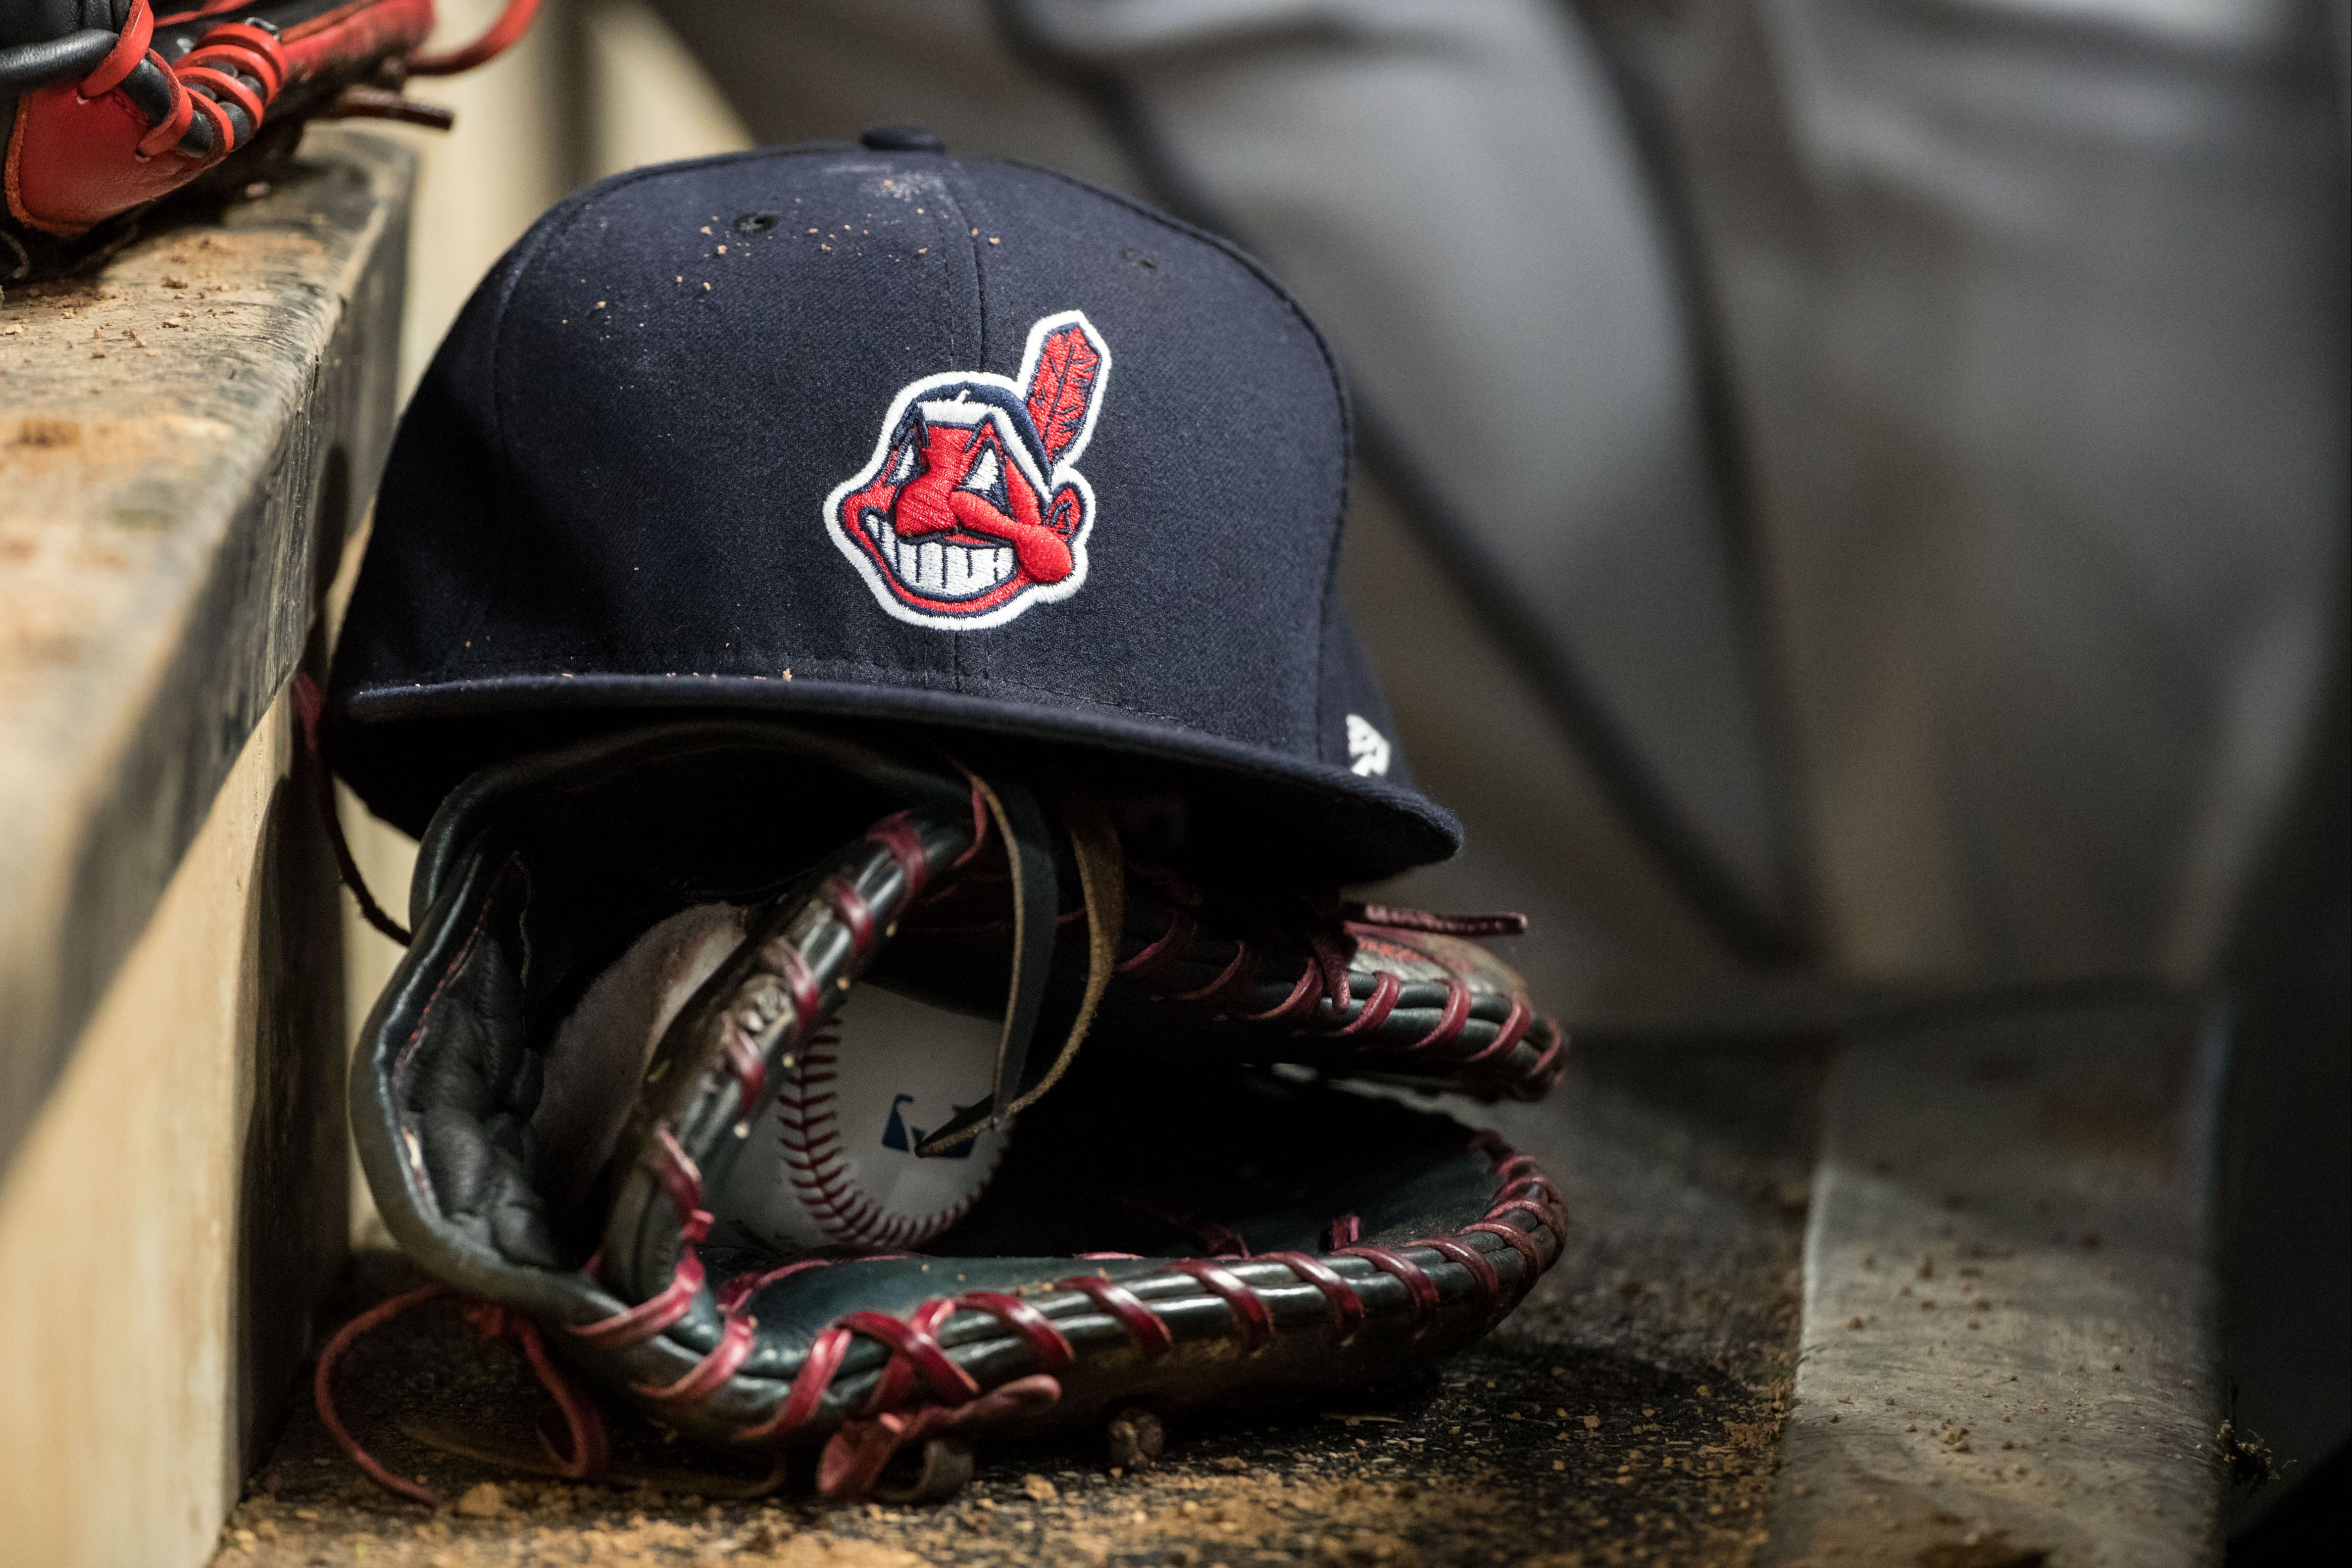 The Cleveland Indians are making changes to the way they manage their controversial mascot.